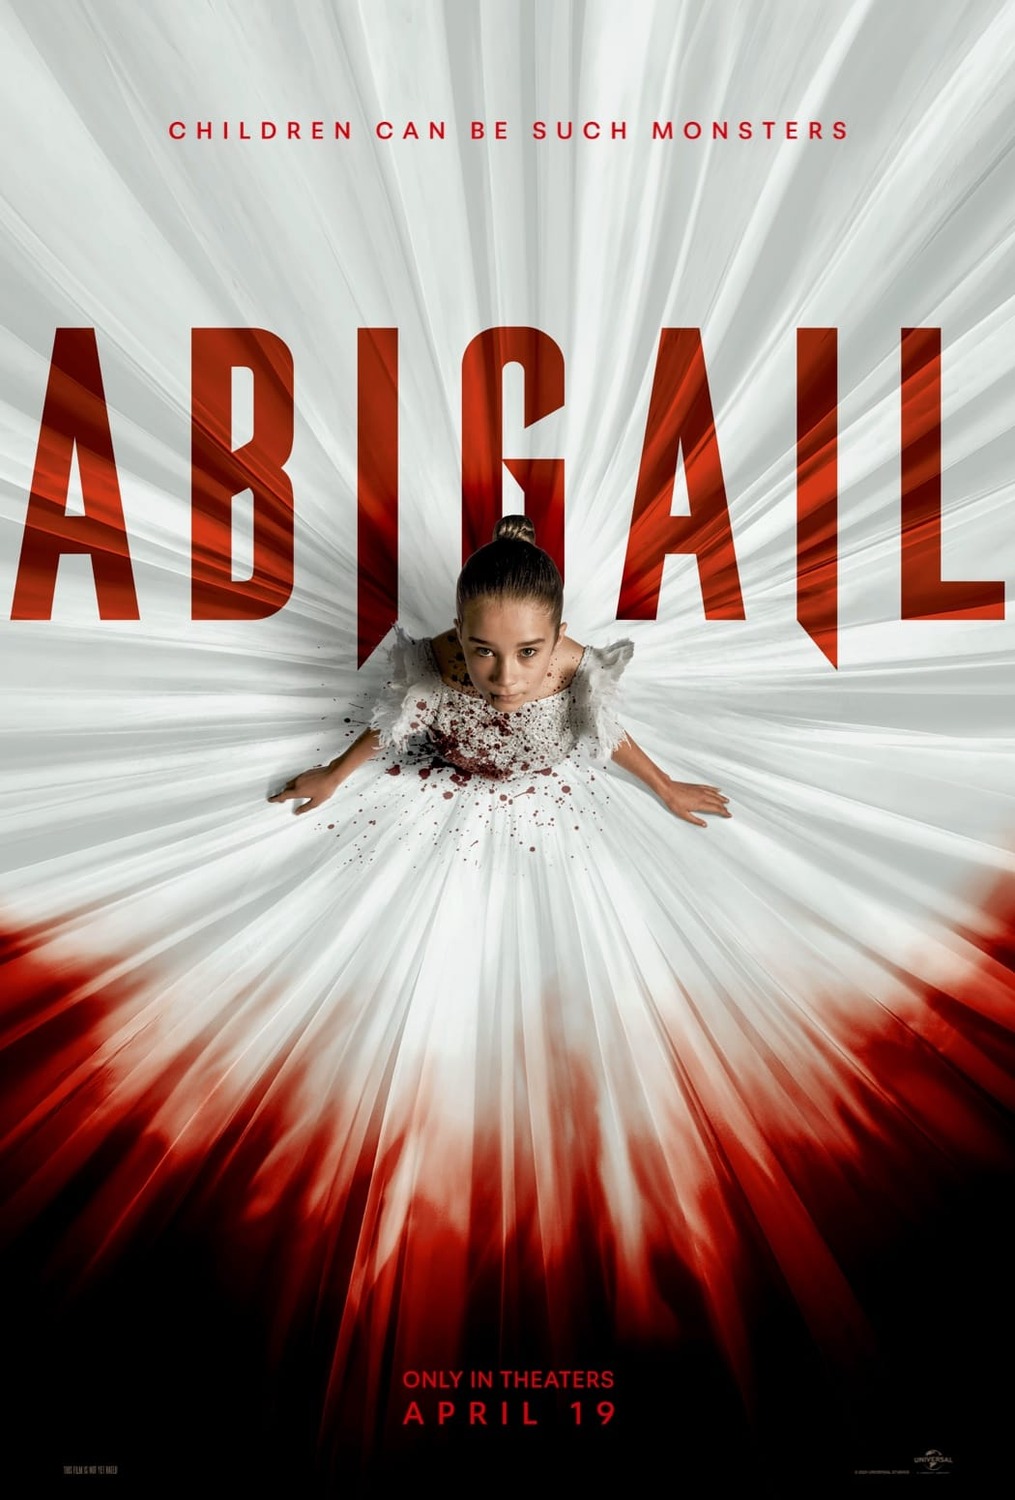 Abigail Review — Vampire film delivers a bloody, fun time